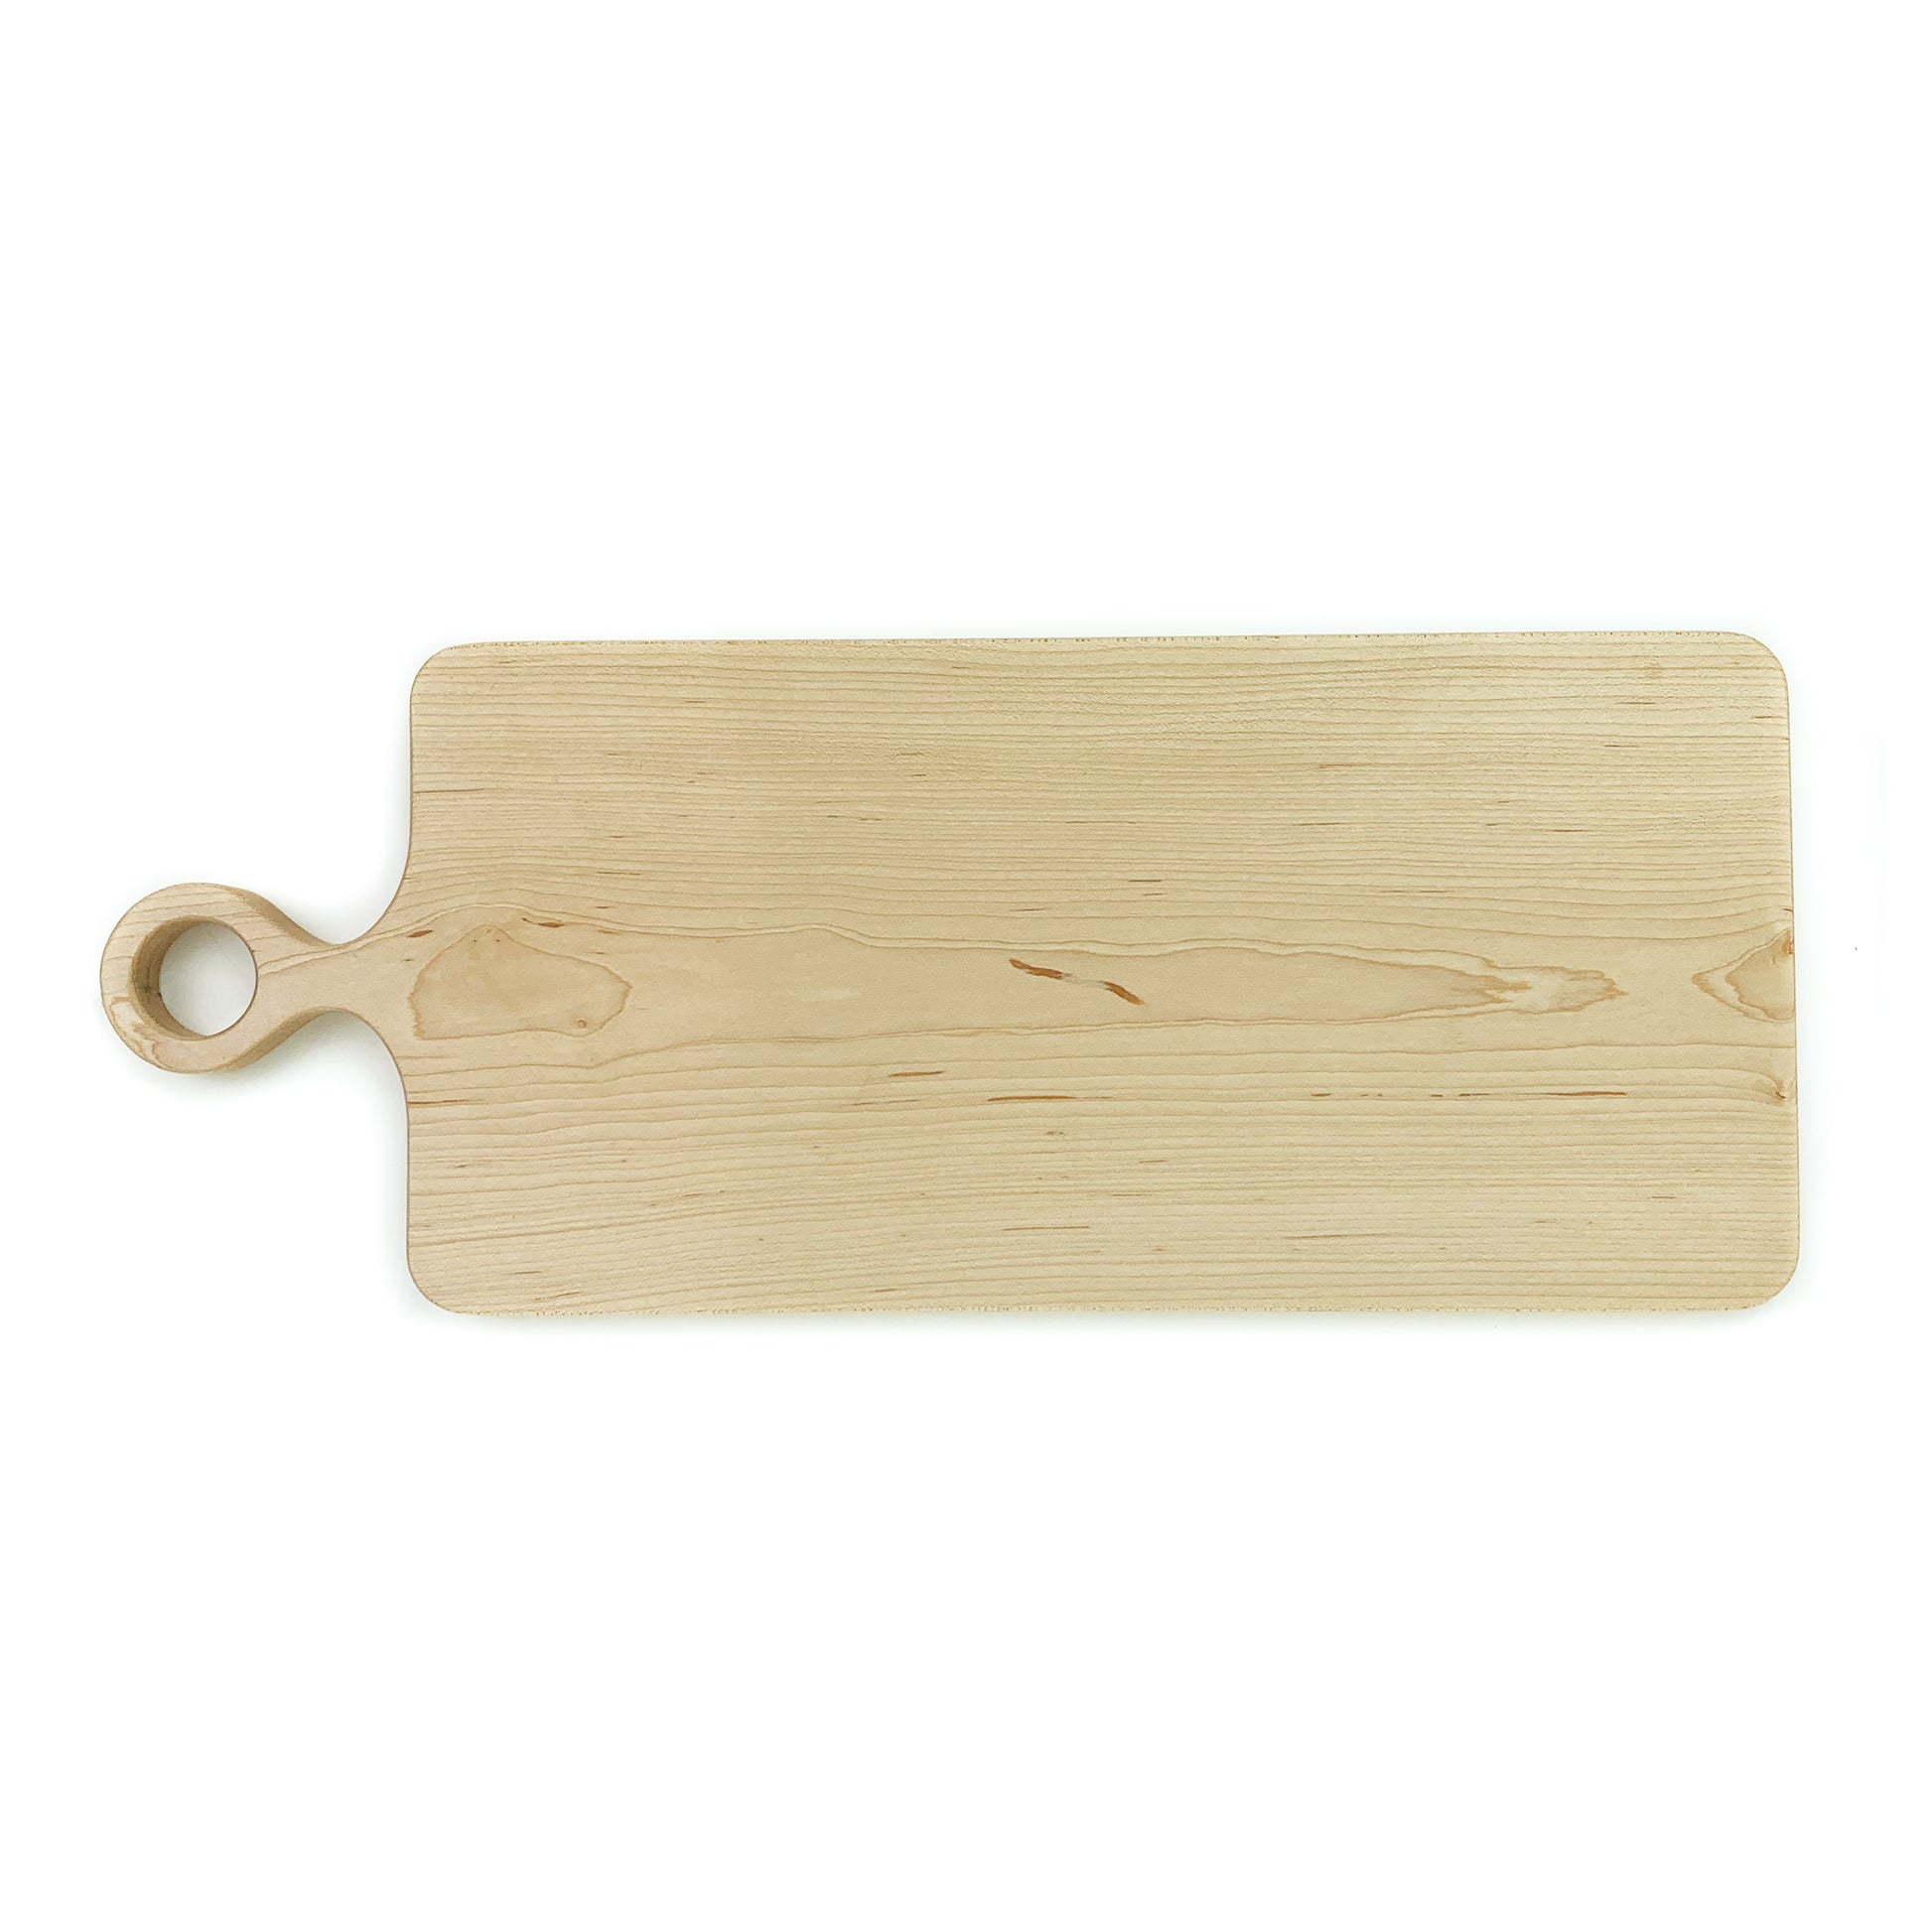 Large Round Wood Cutting Board  Adirondack Kitchen – East Third Collective